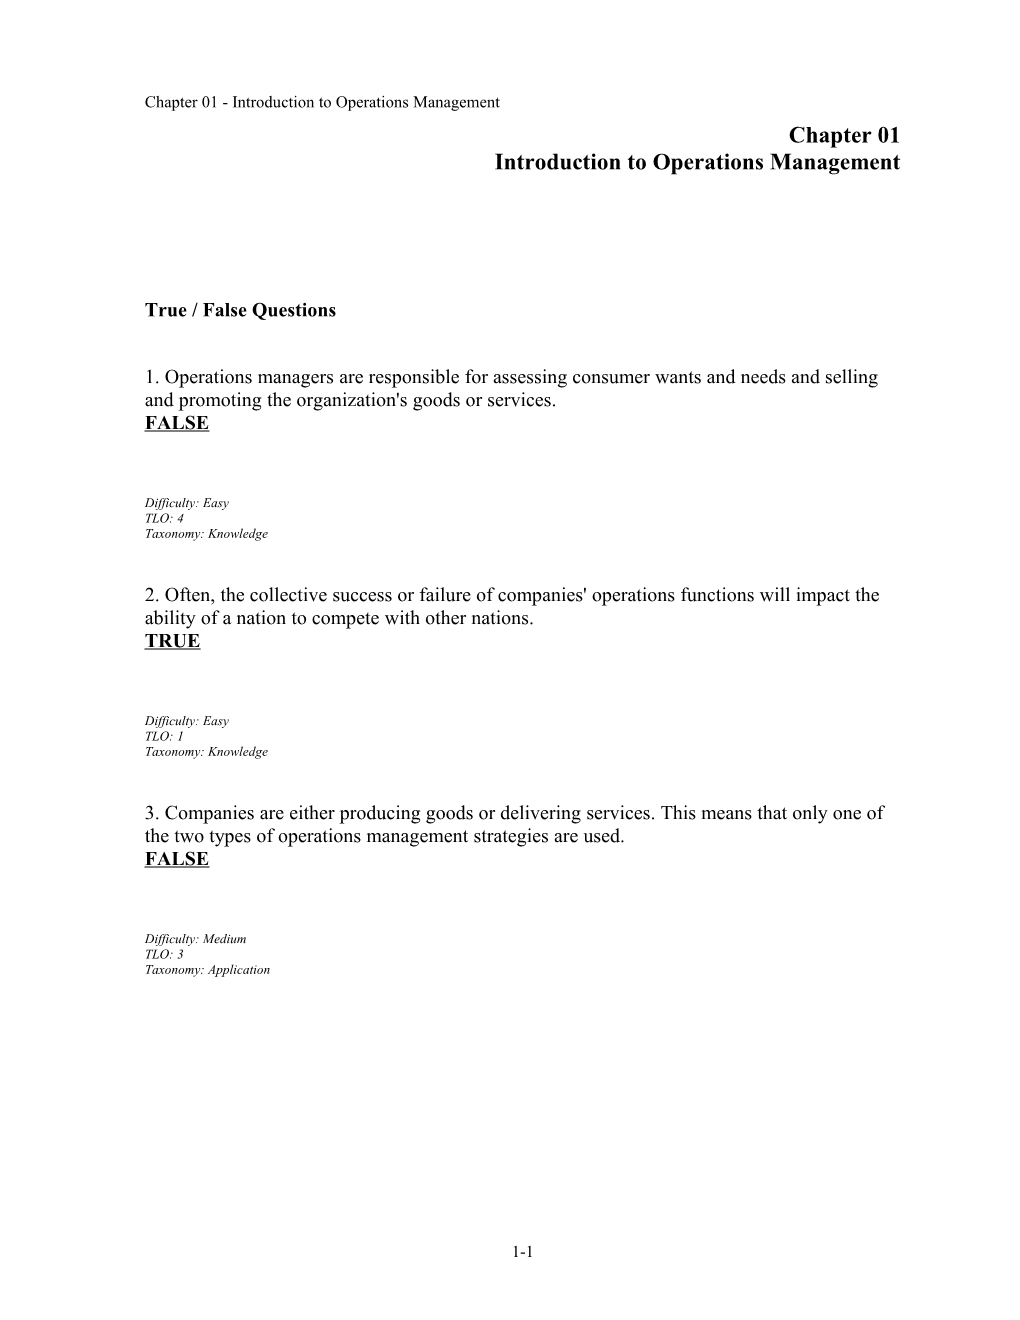 Chapter 01 Introduction to Operations Management